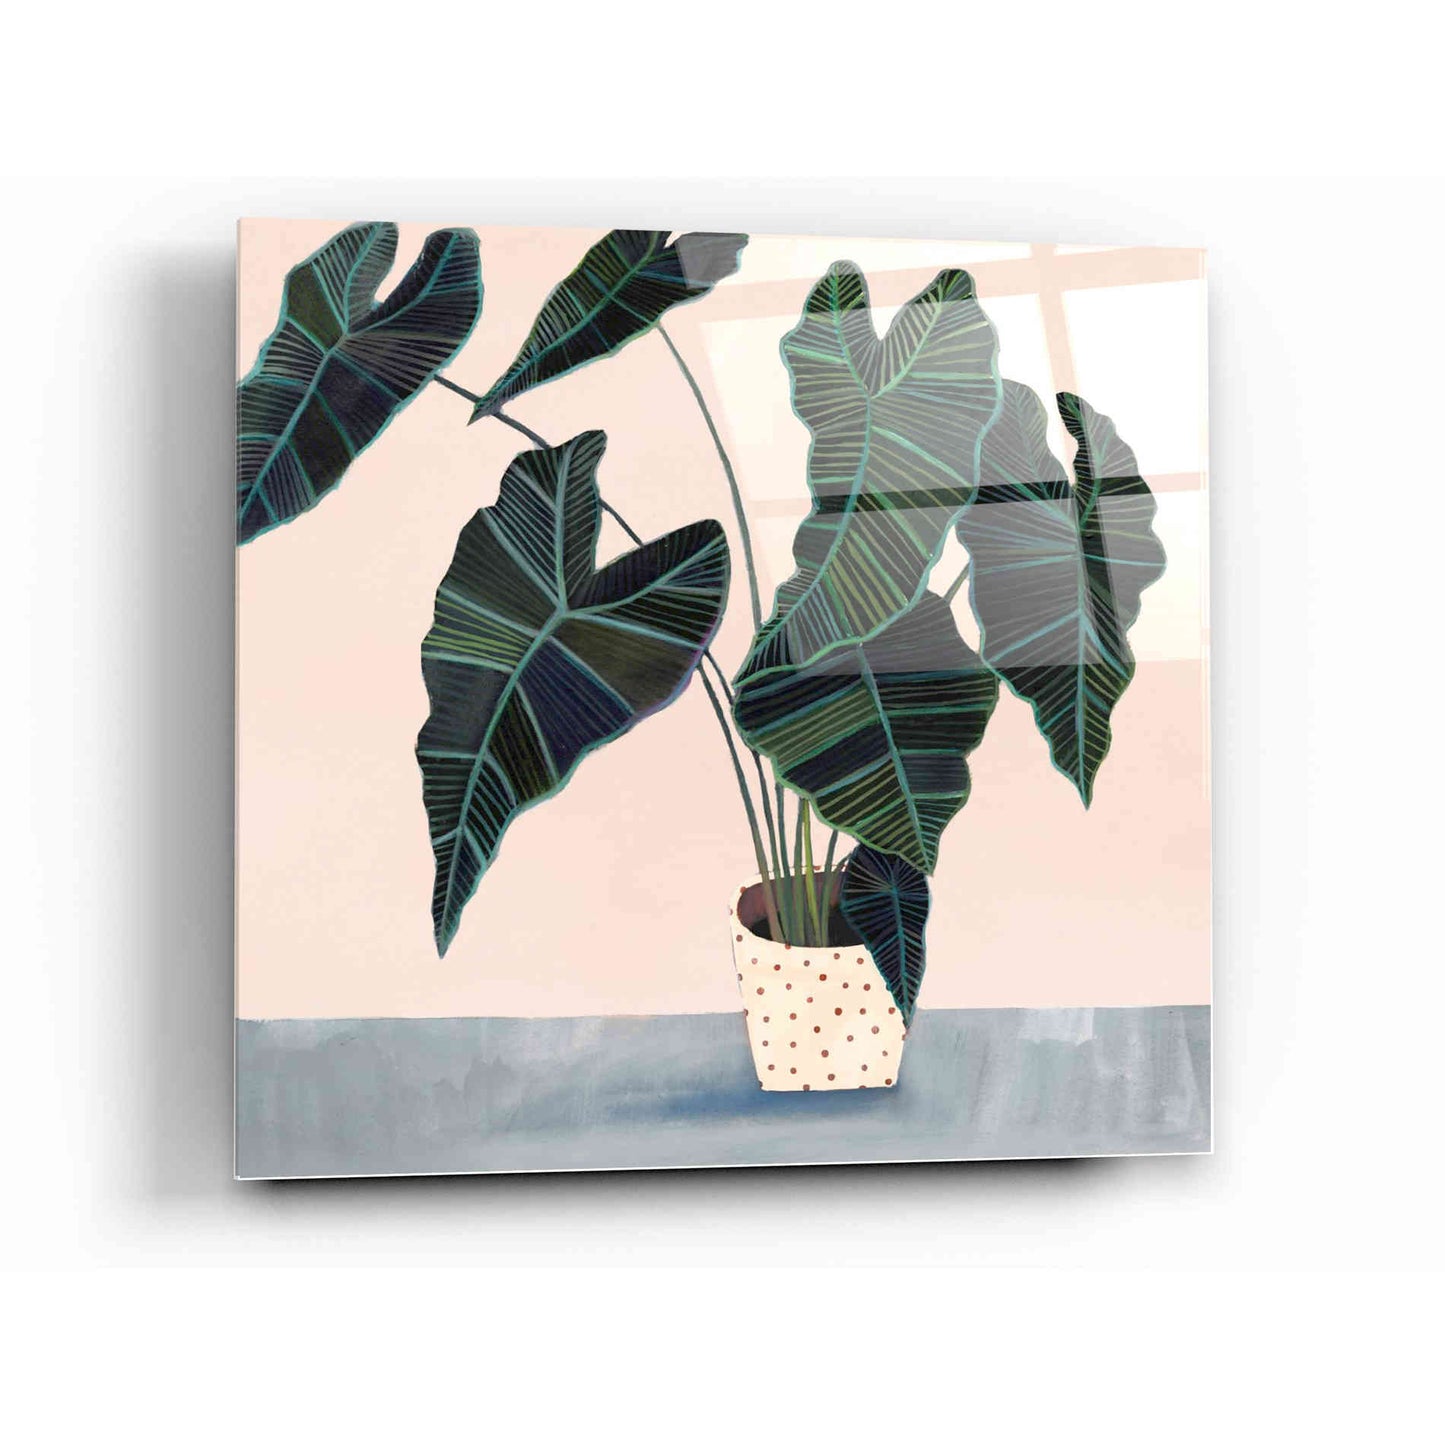 Epic Art 'Houseplant II' by Victoria Borges Acrylic Glass Wall Art,12x12